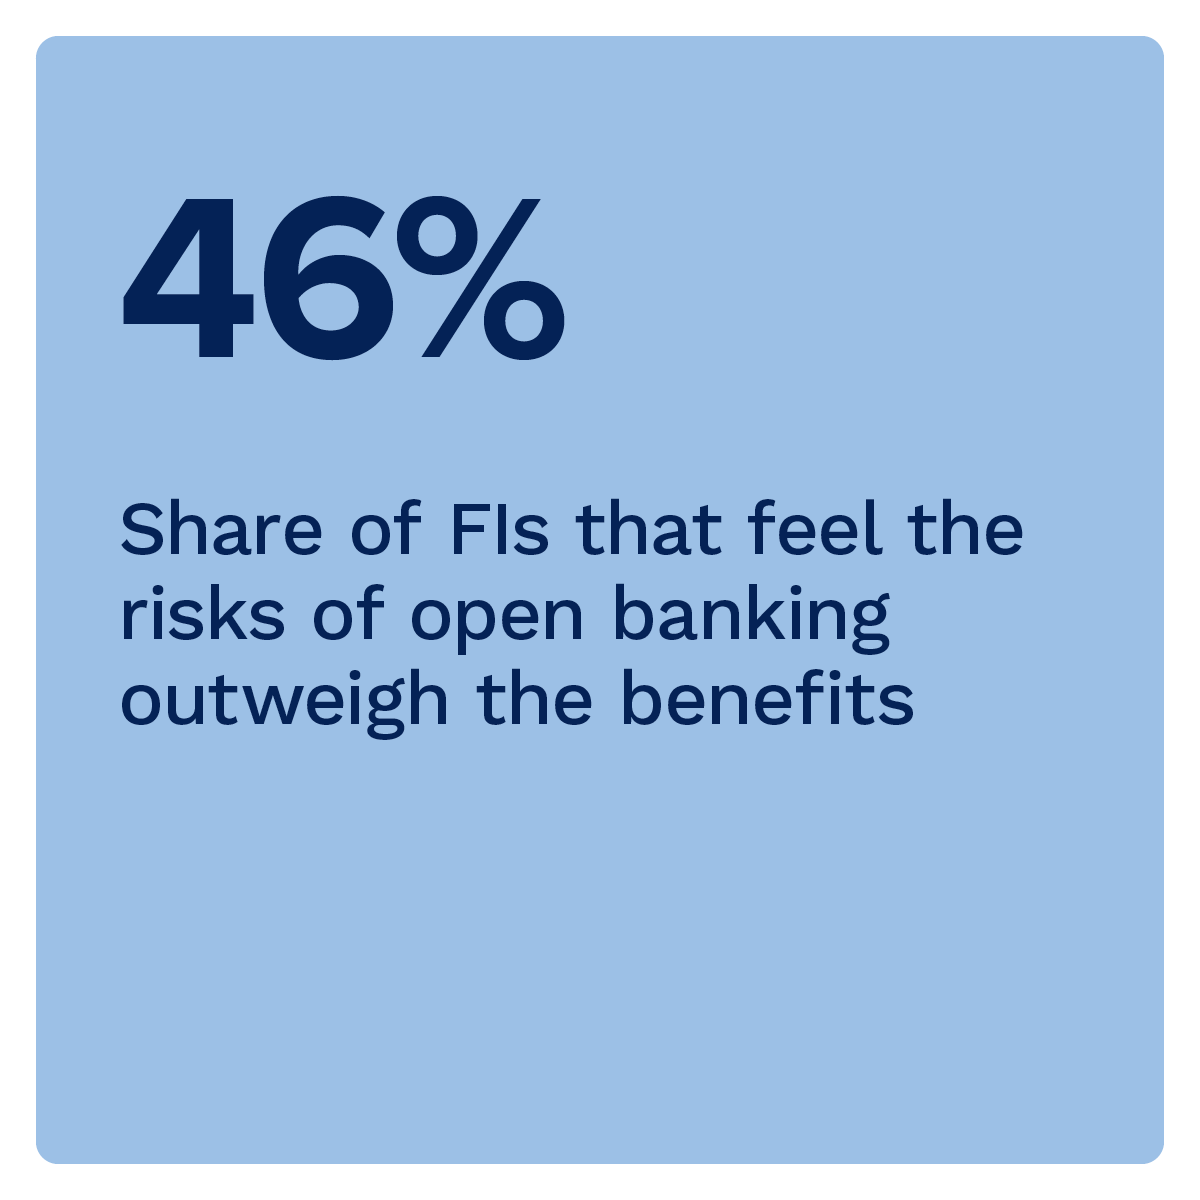 46%: Share of FIs that feel the risks of open banking outweigh the benefits